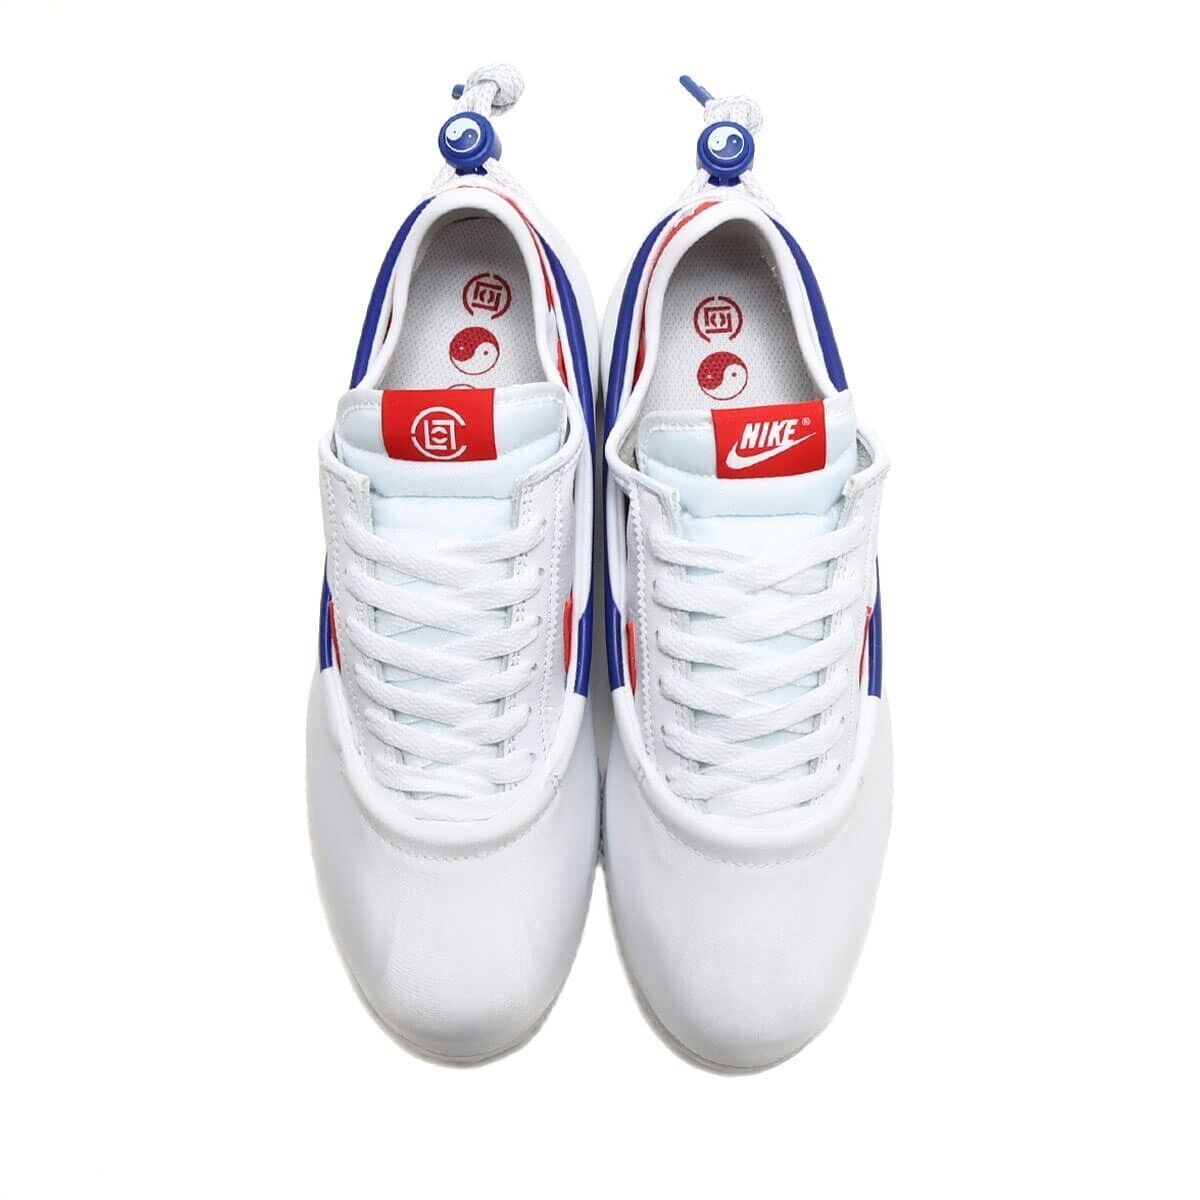 CLOT × Nike Cortez "White and Game Royal" DZ3239-100 Sneaker Appraised US6.5-12